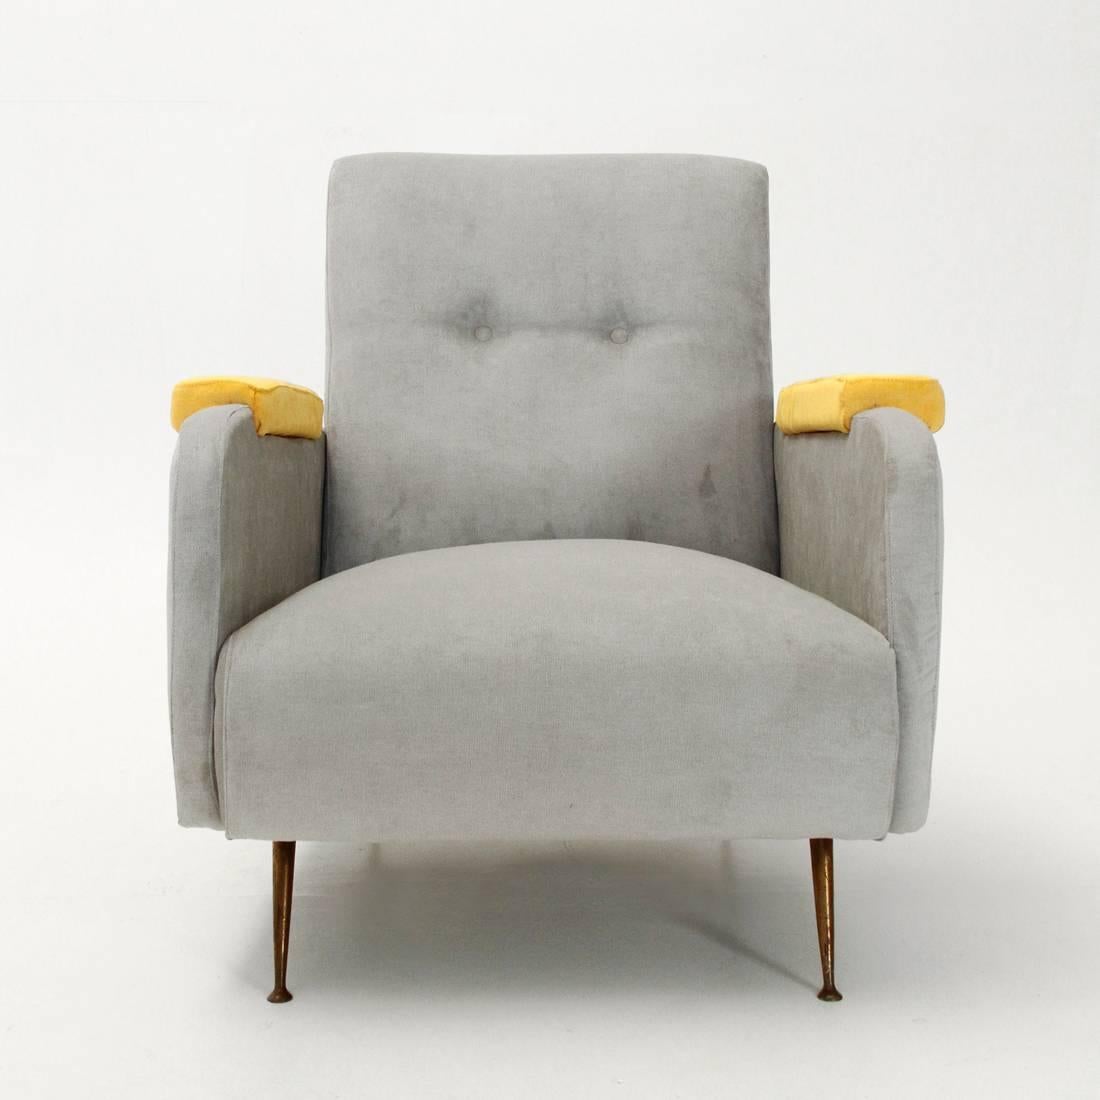 Italian sitting produced in the 1950s.
Upholstered and lined wooden structure in new TPA velvet fabric.
Upholstered armrest with contrast fabric.
Brass legs.
Good general conditions.

Dimensions: Width 74 cm - depth 70 cm - height 78 cm - seat